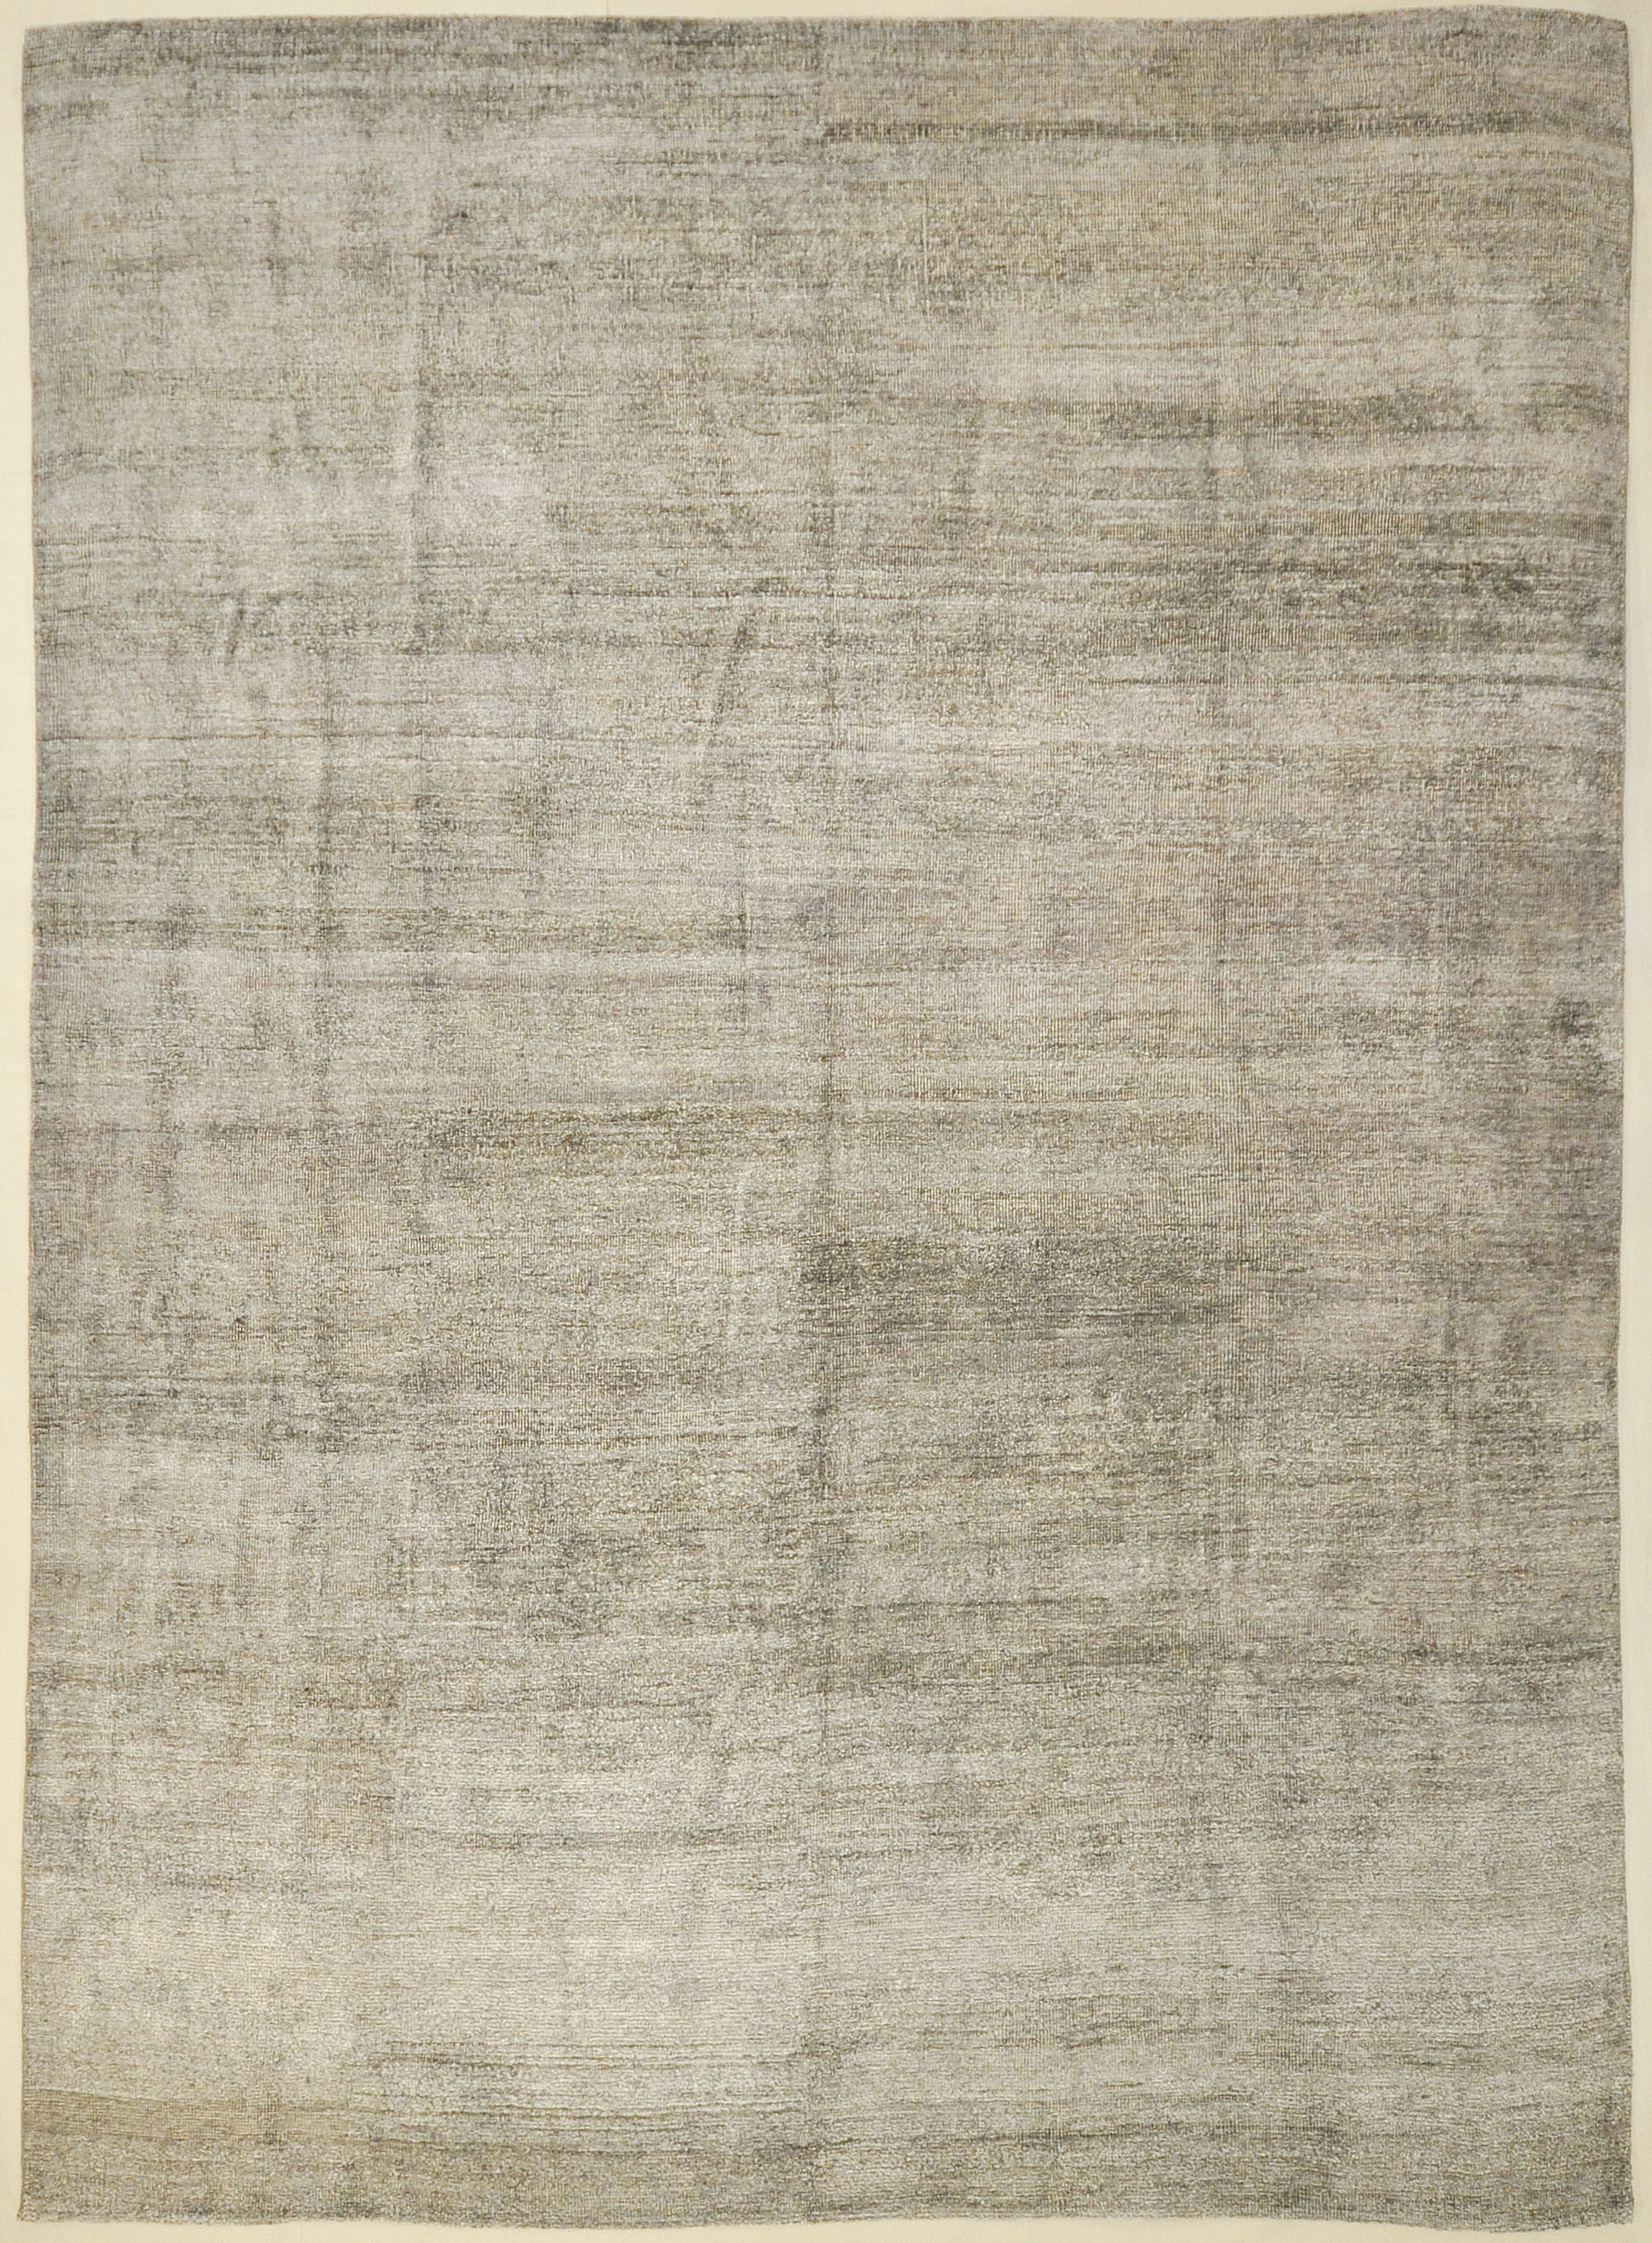 Montecito Oushak Rug 30294. A piece of genuine authentic woven art woven by Ziegler and Company and sold by Santa Barbara Design Center, Rugs and More.